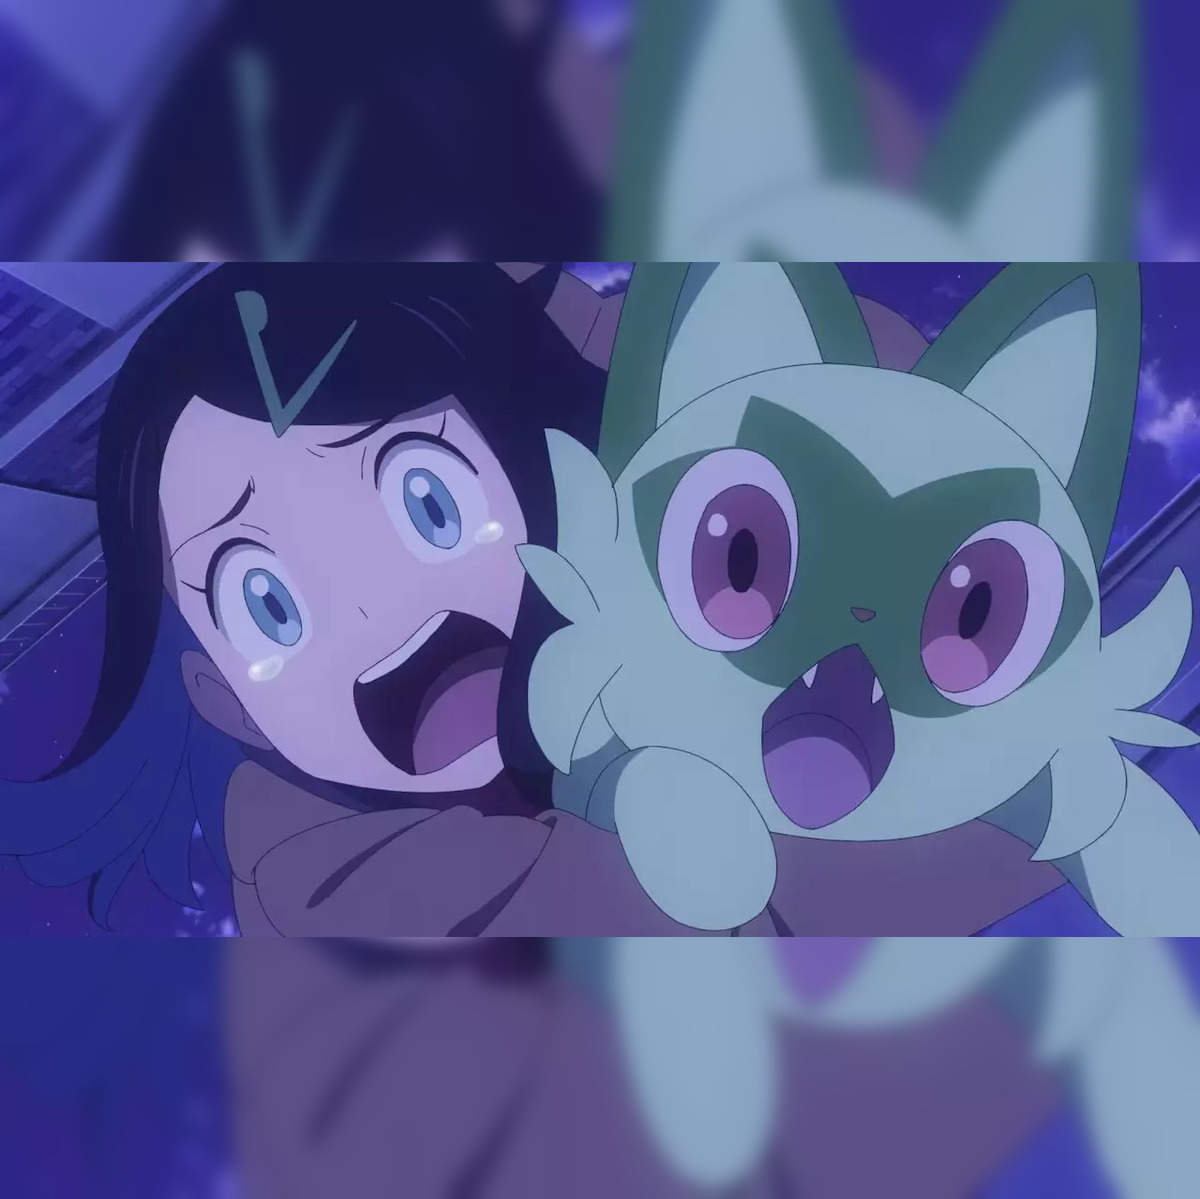 Your Name' anime studio releases video for Japan's first Pokémon